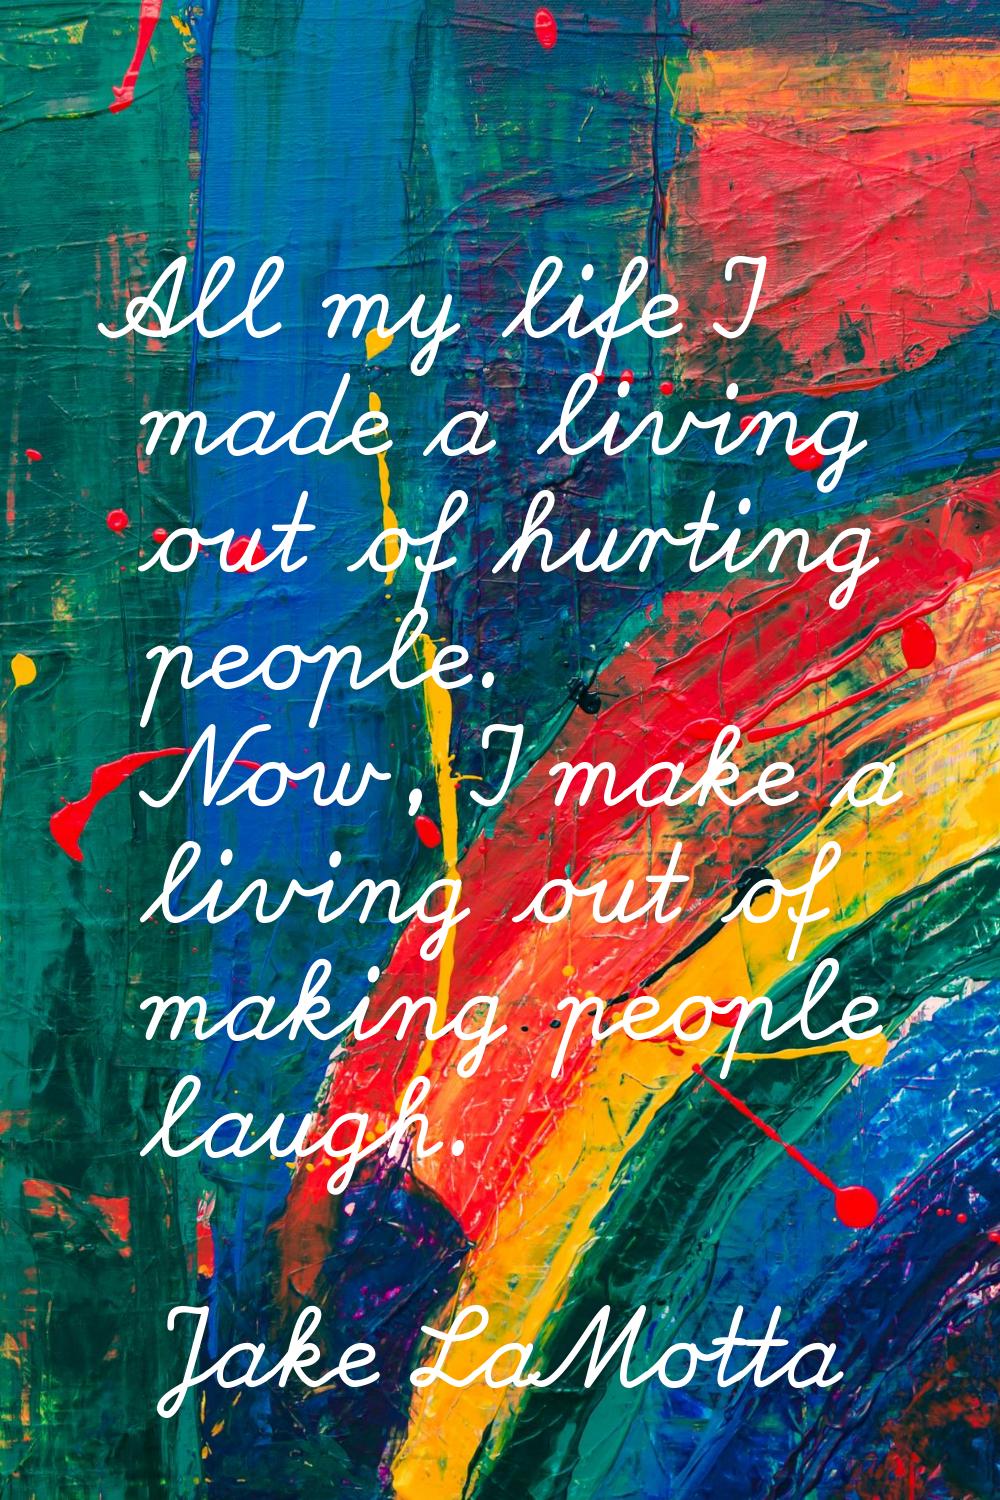 All my life I made a living out of hurting people. Now, I make a living out of making people laugh.